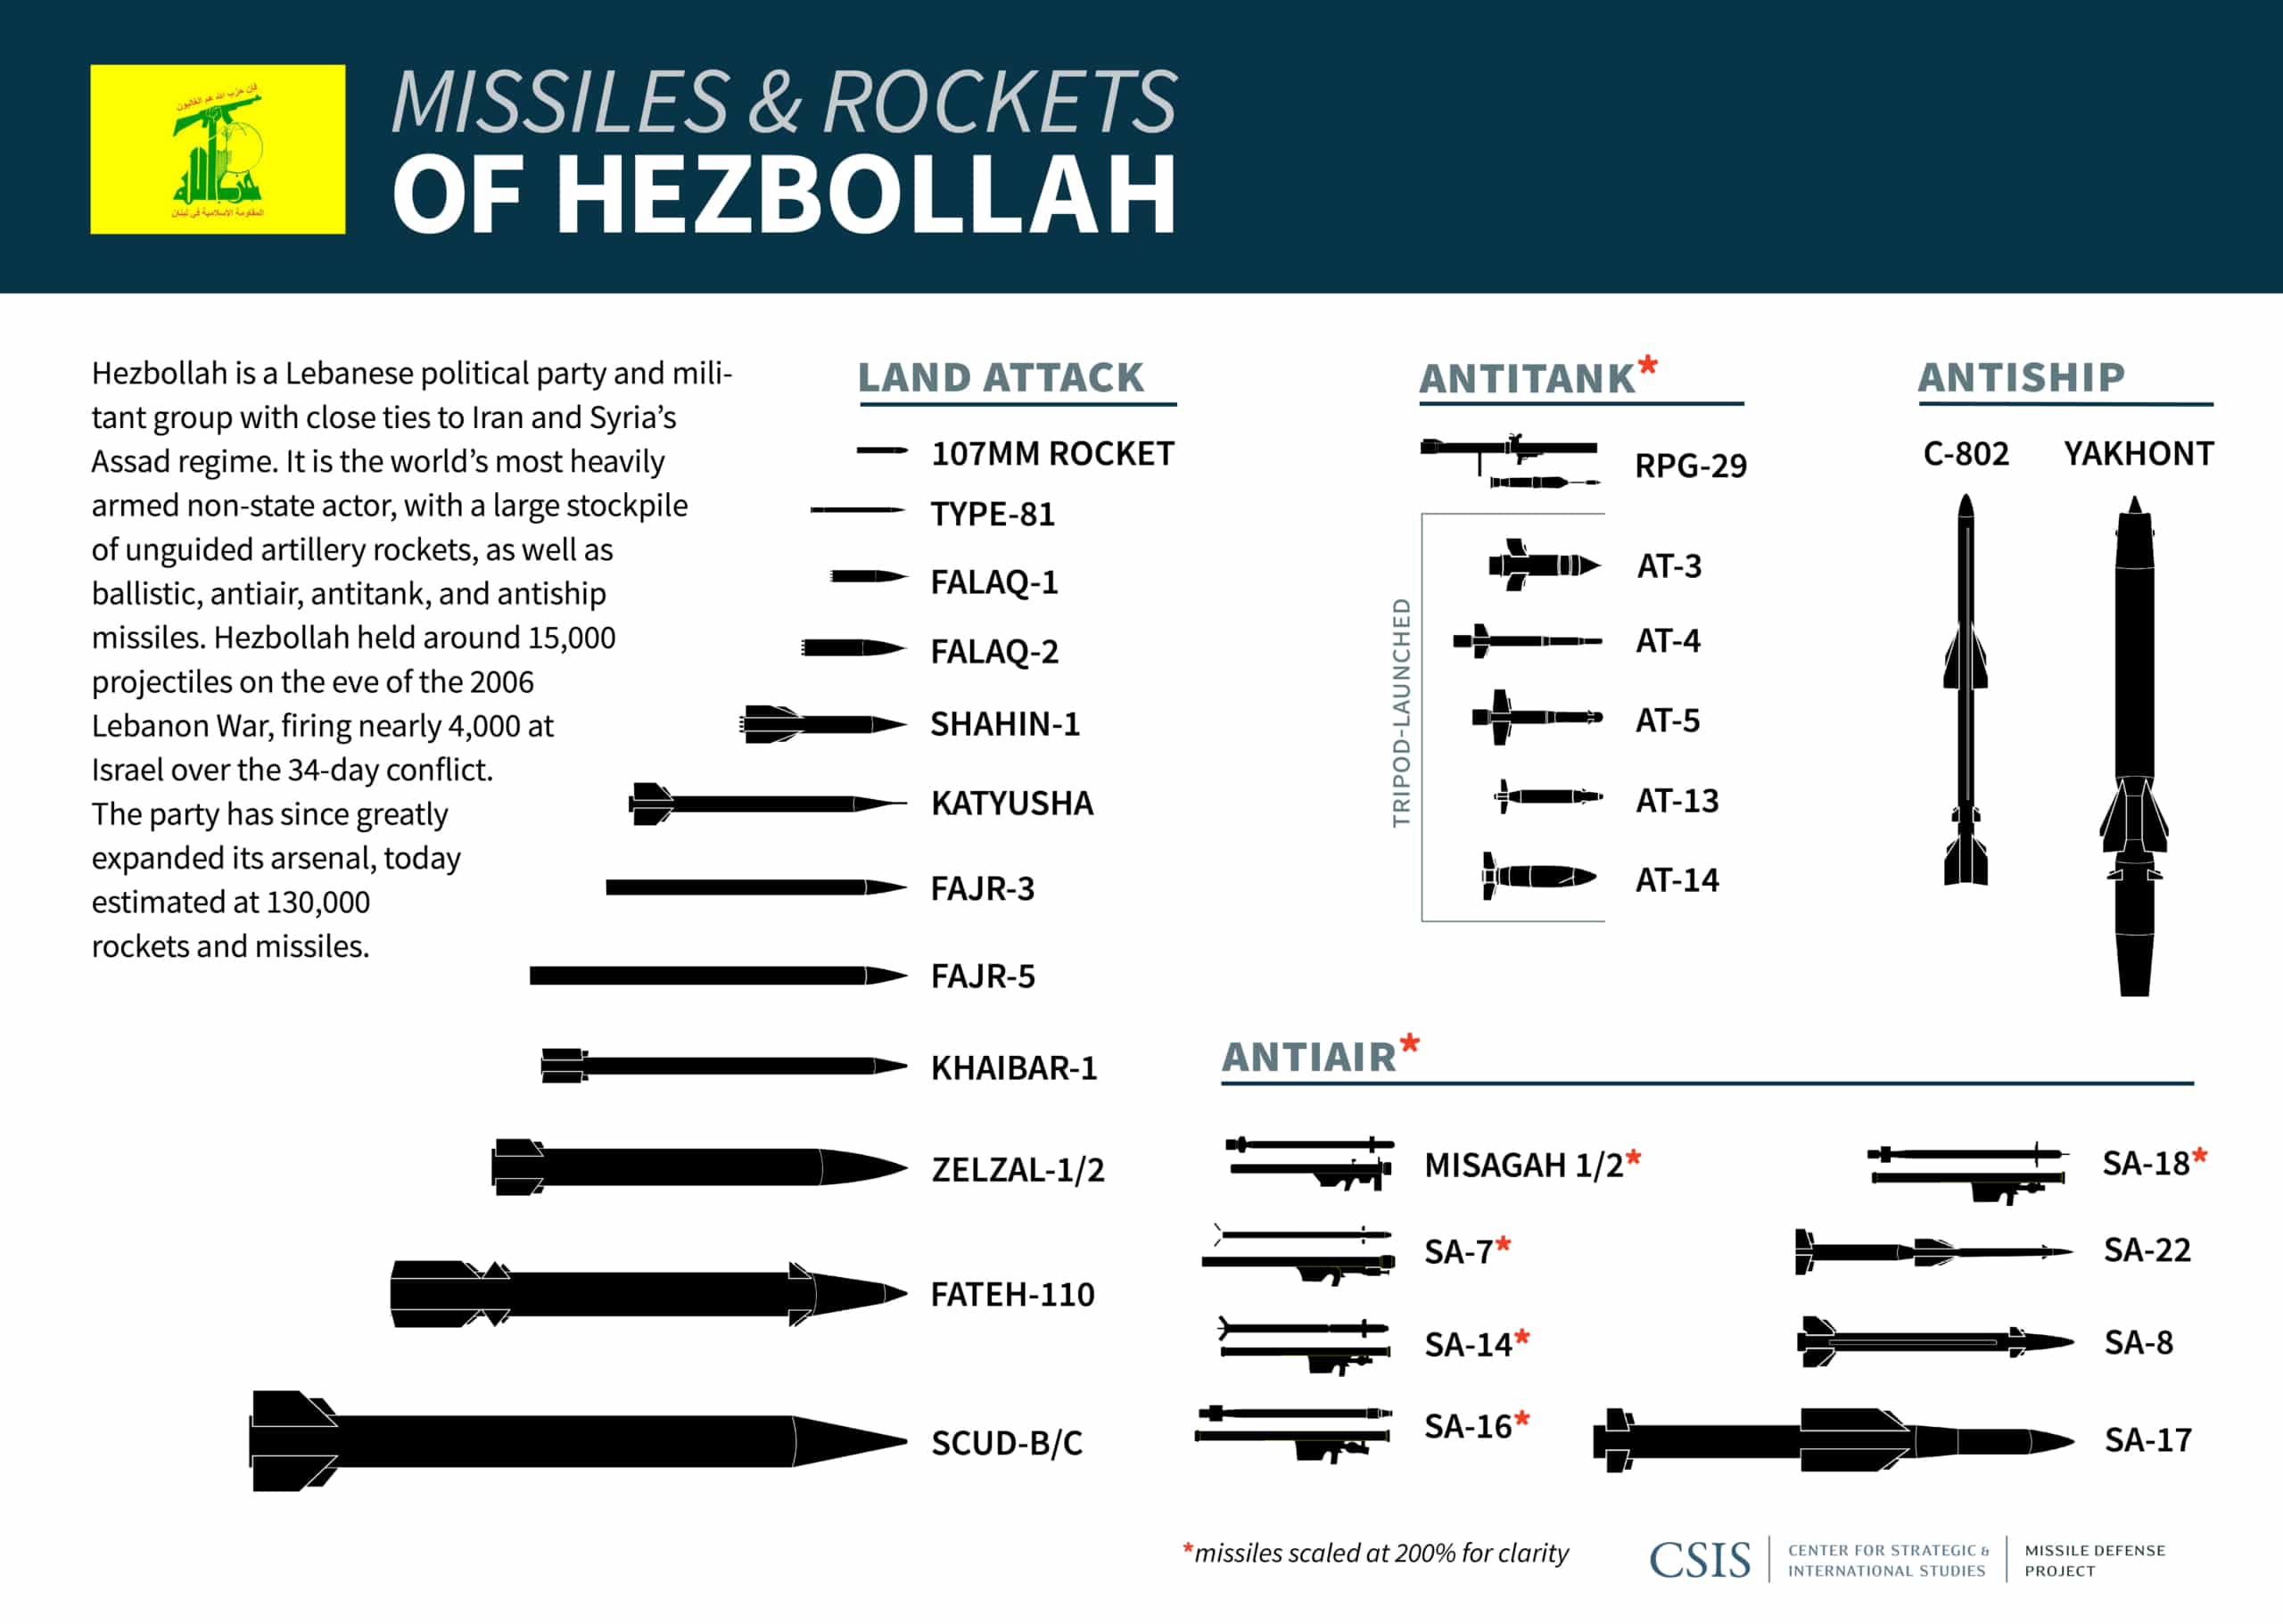 Hezbollah's Missiles and Rockets